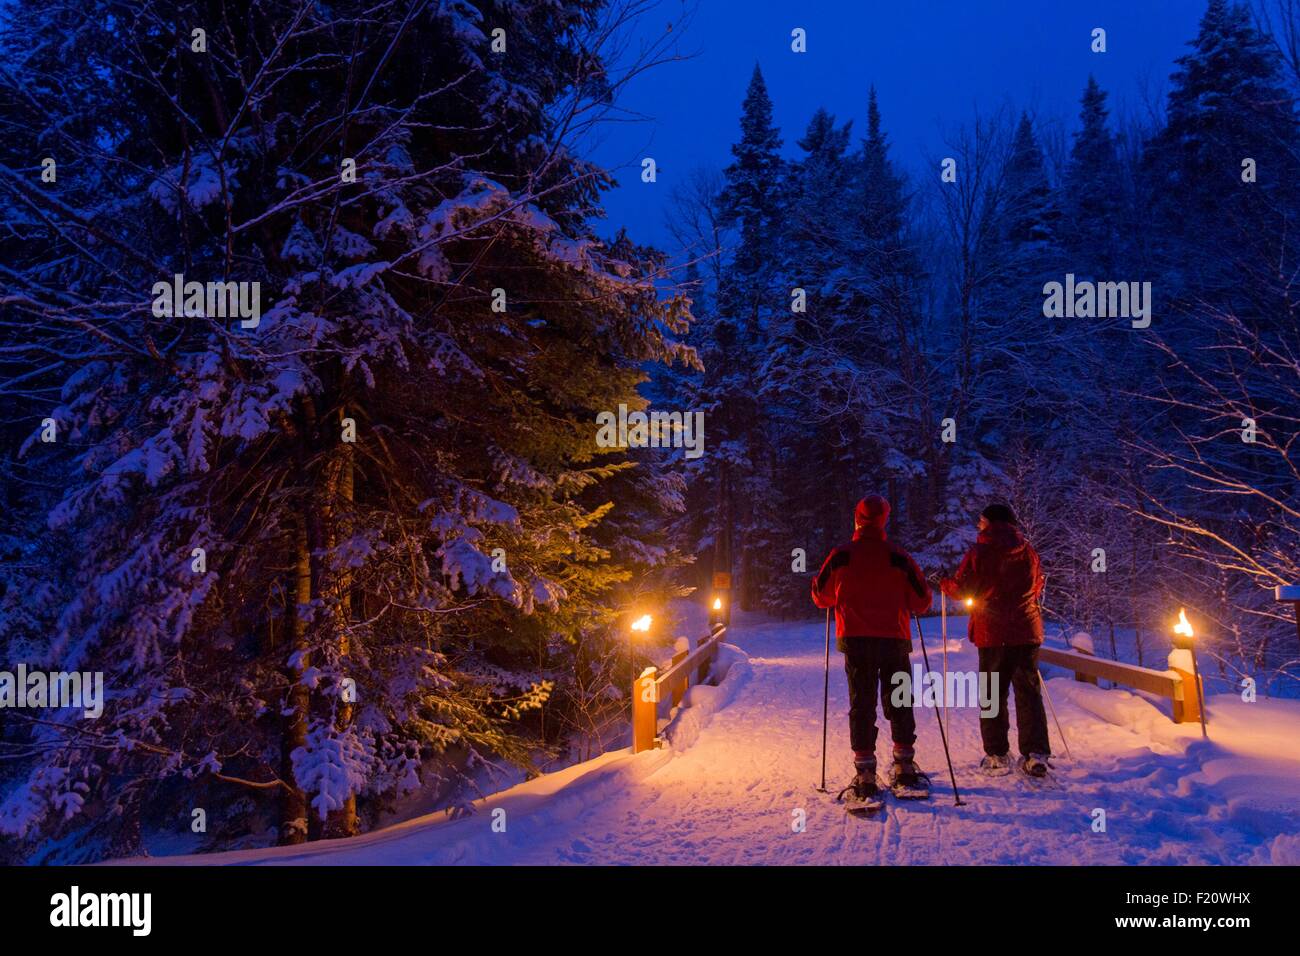 Canada, Quebec province, Eastern Townships or Estrie, Parc national du Mont Megantic, the Astrolab, snowshoe hiking in the light of torches Stock Photo